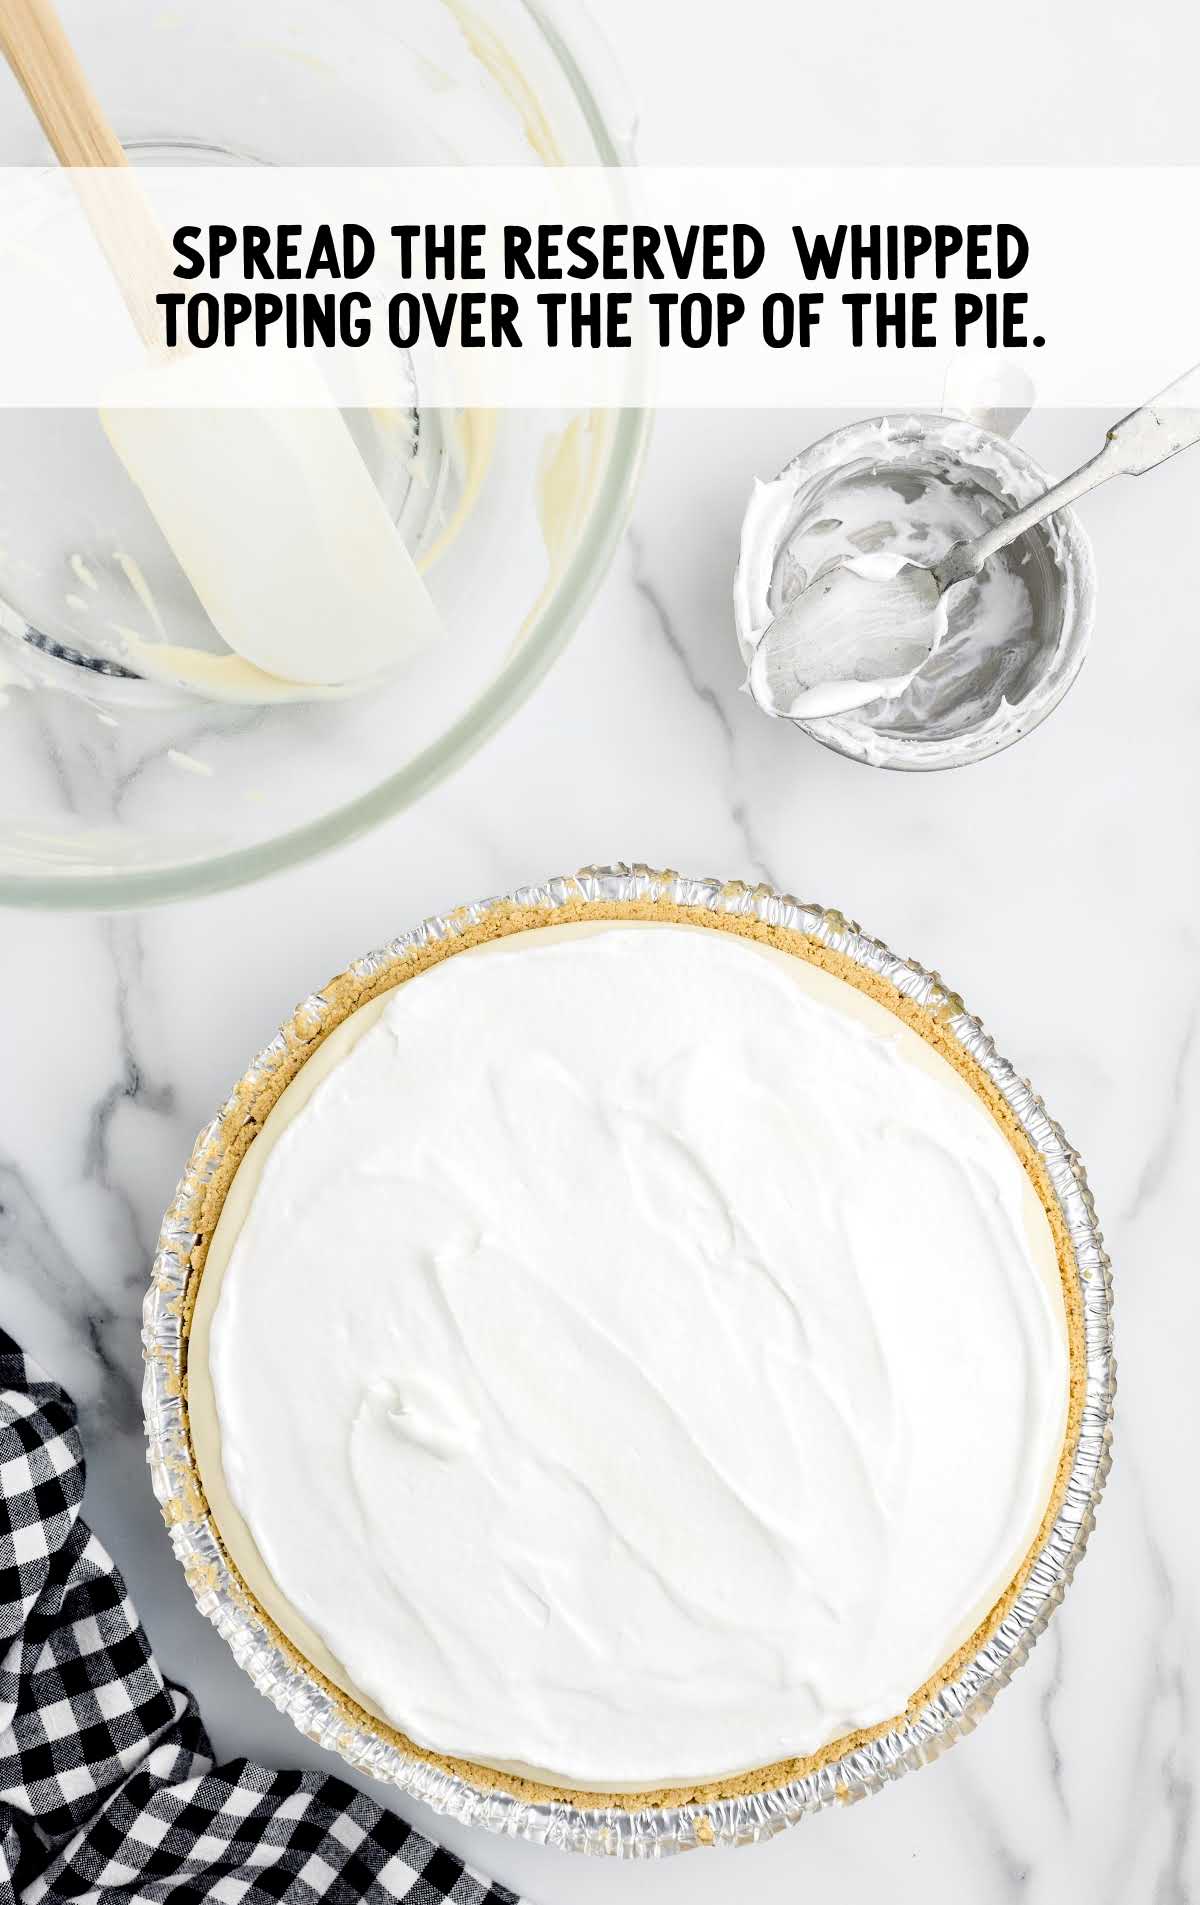 whipped topping spread over the pie